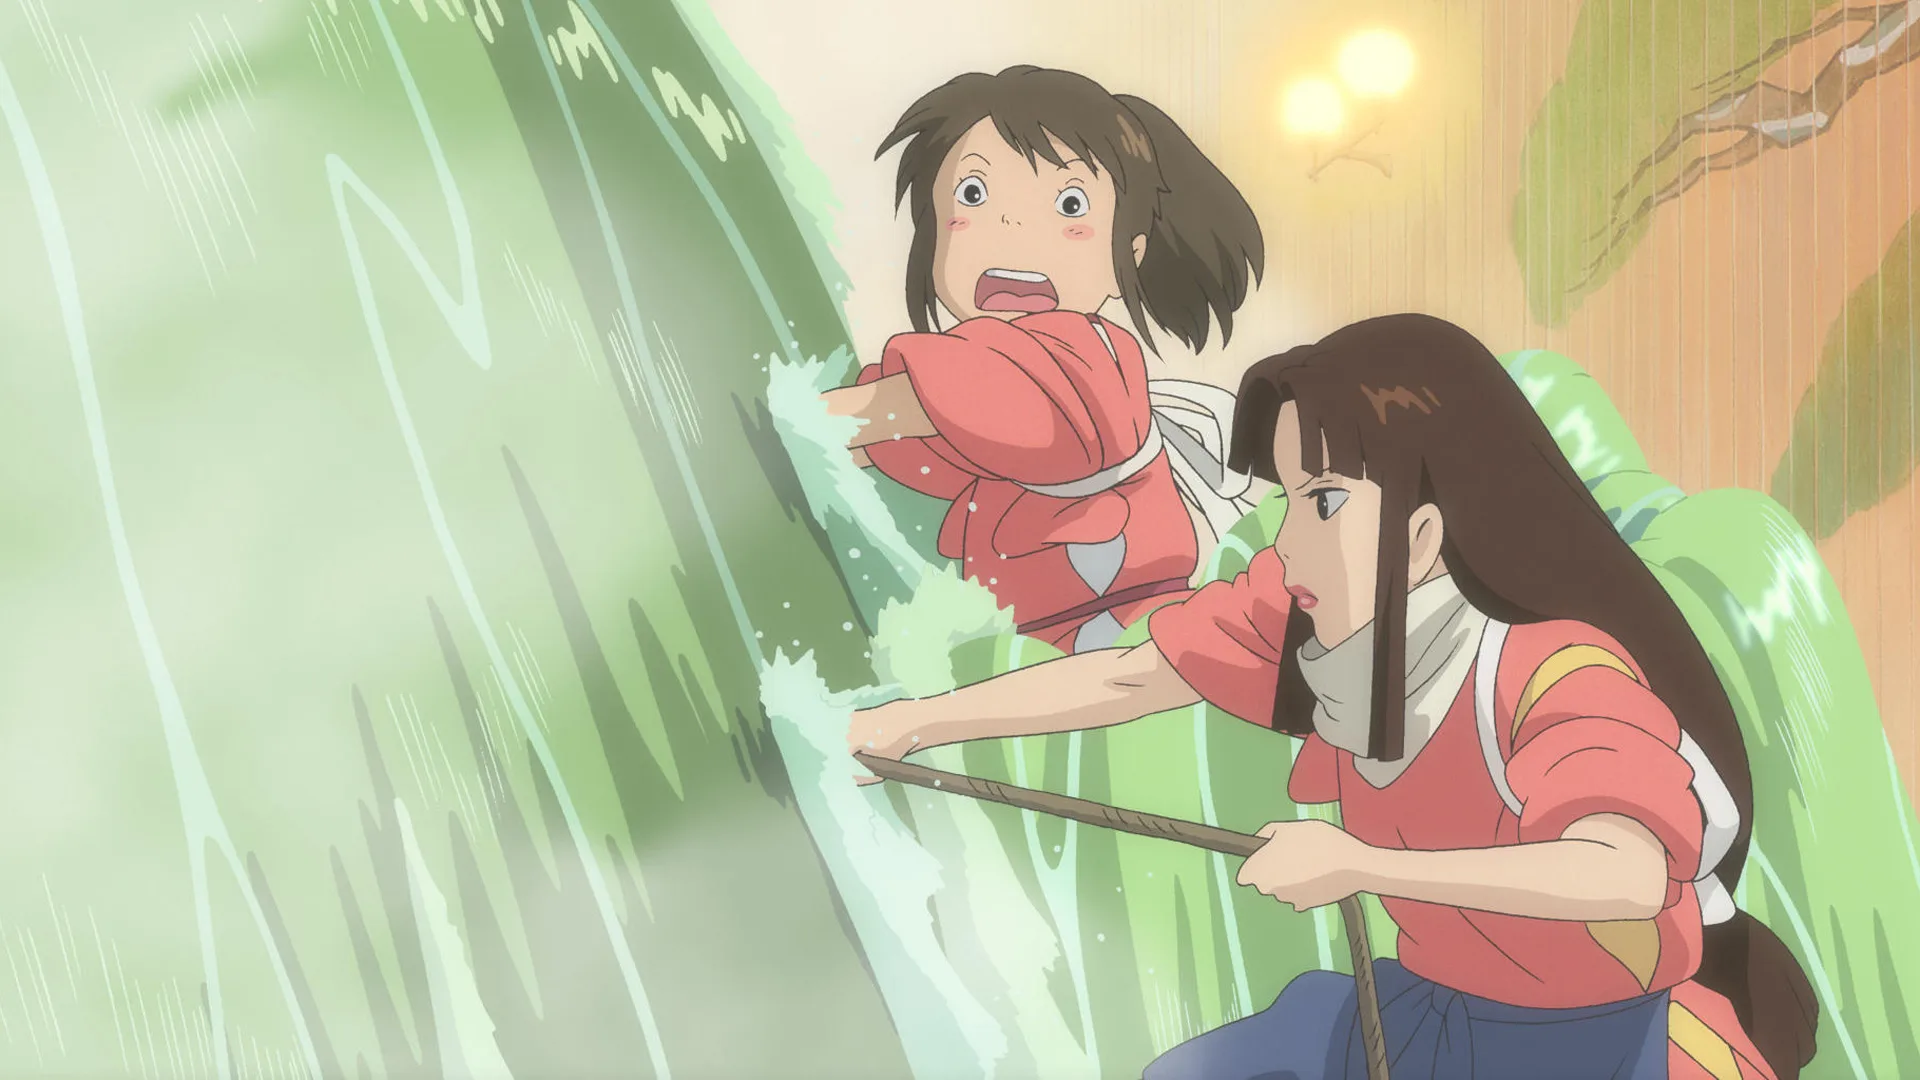 A still from the film Spirited Away showing Chihiro and her friend trying to fix a leak in a cascade of water - both look surprised and are wearing pink outfits.